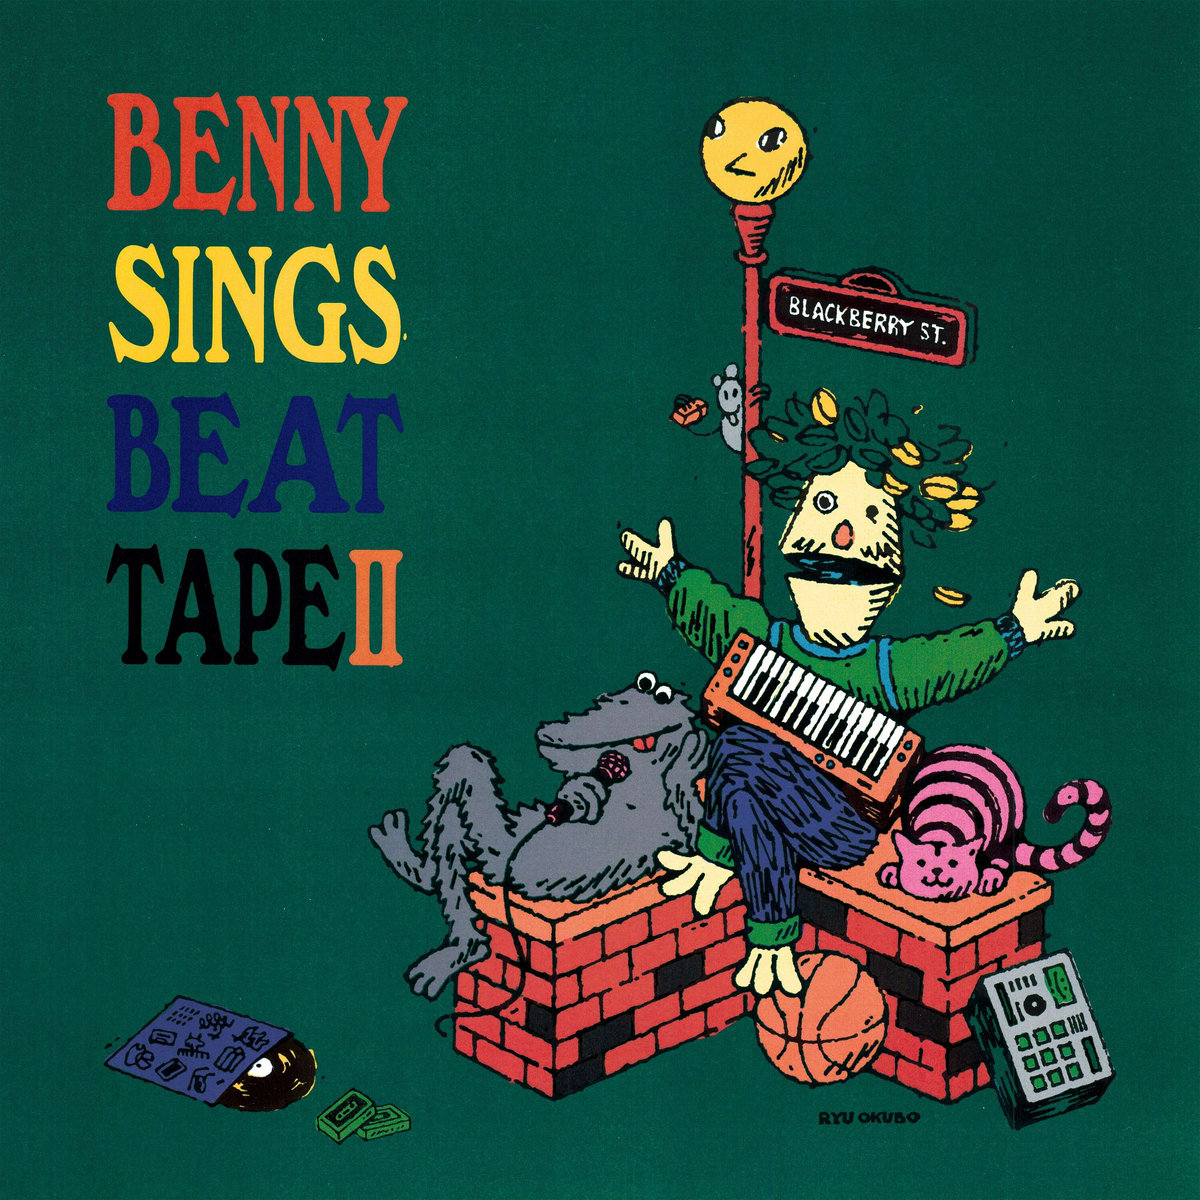 Benny Sings featuring Jones — Look what we do cover artwork